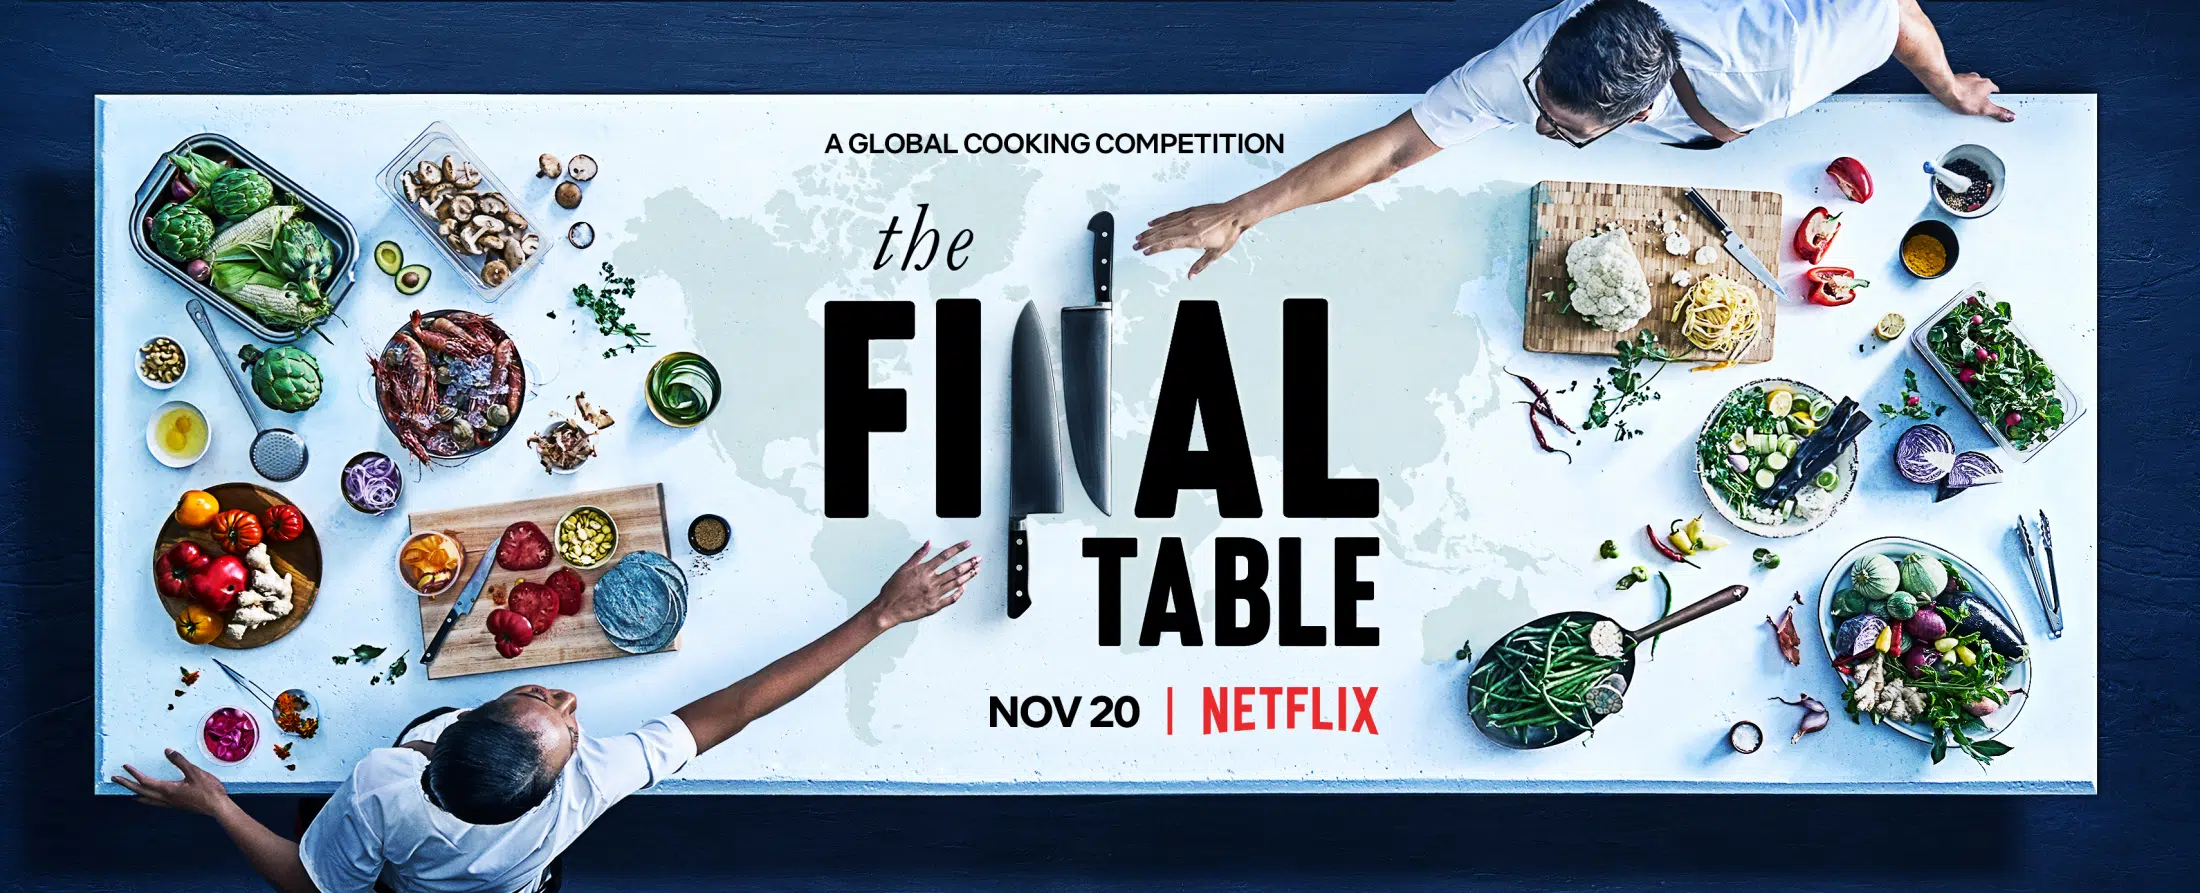 The Final Table Poster